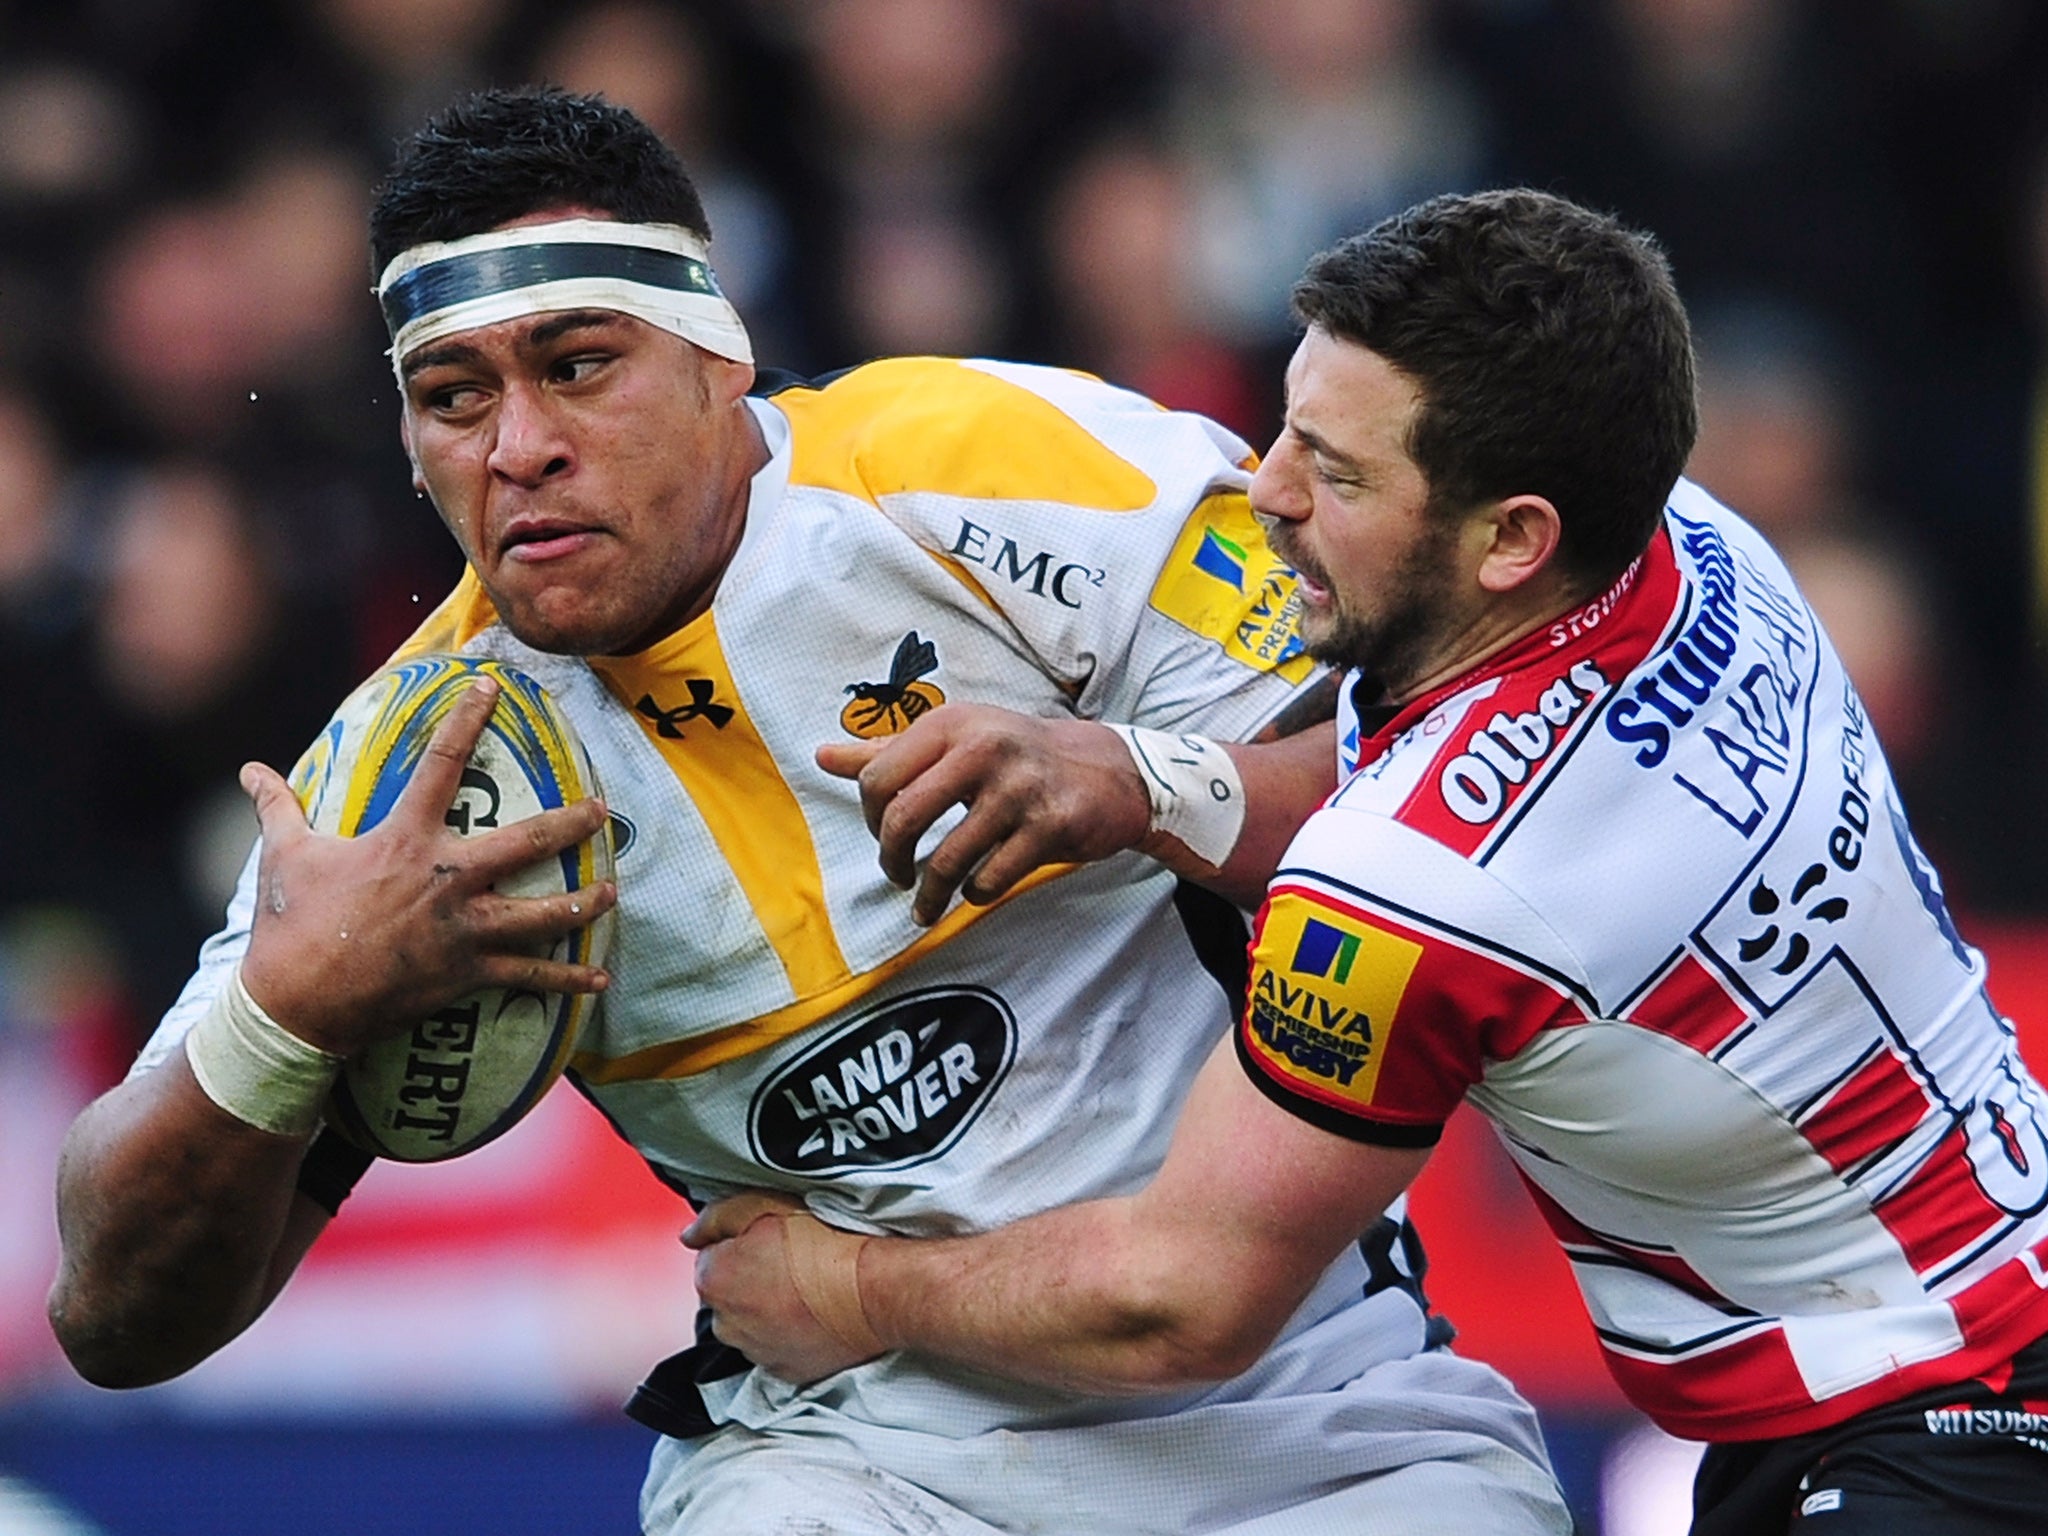 Nathan Hughes of Wasps is tackled by Greig Laidlaw of Gloucester